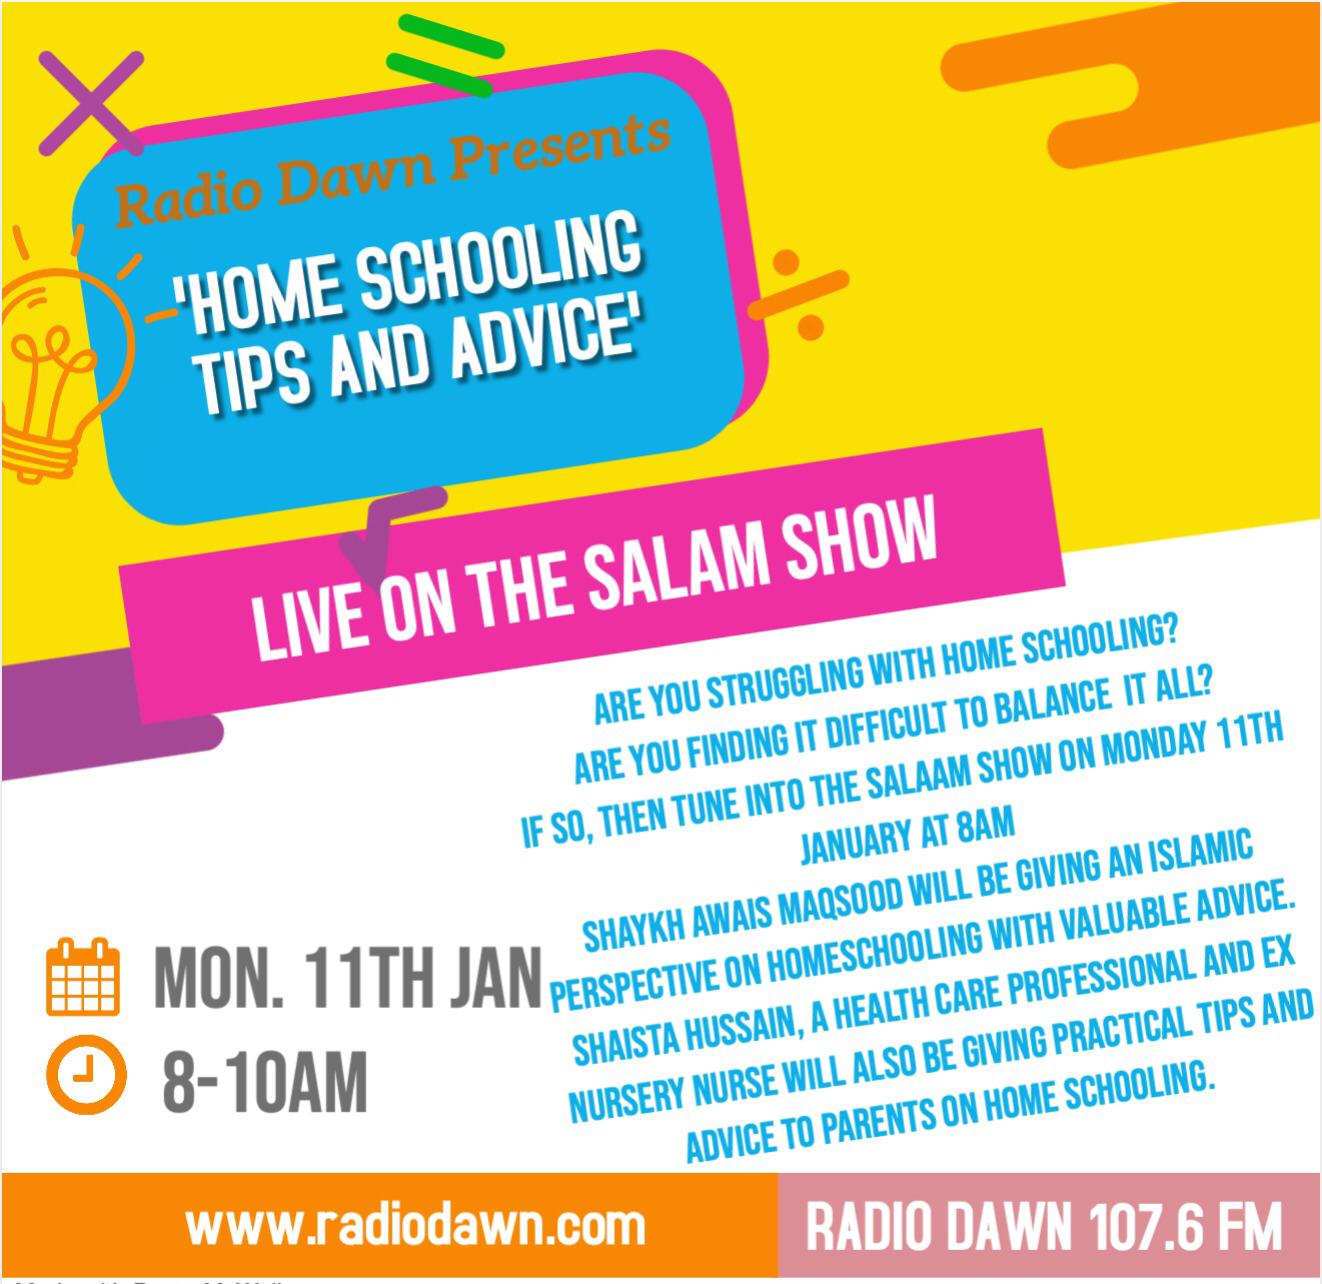 The SALAM Show